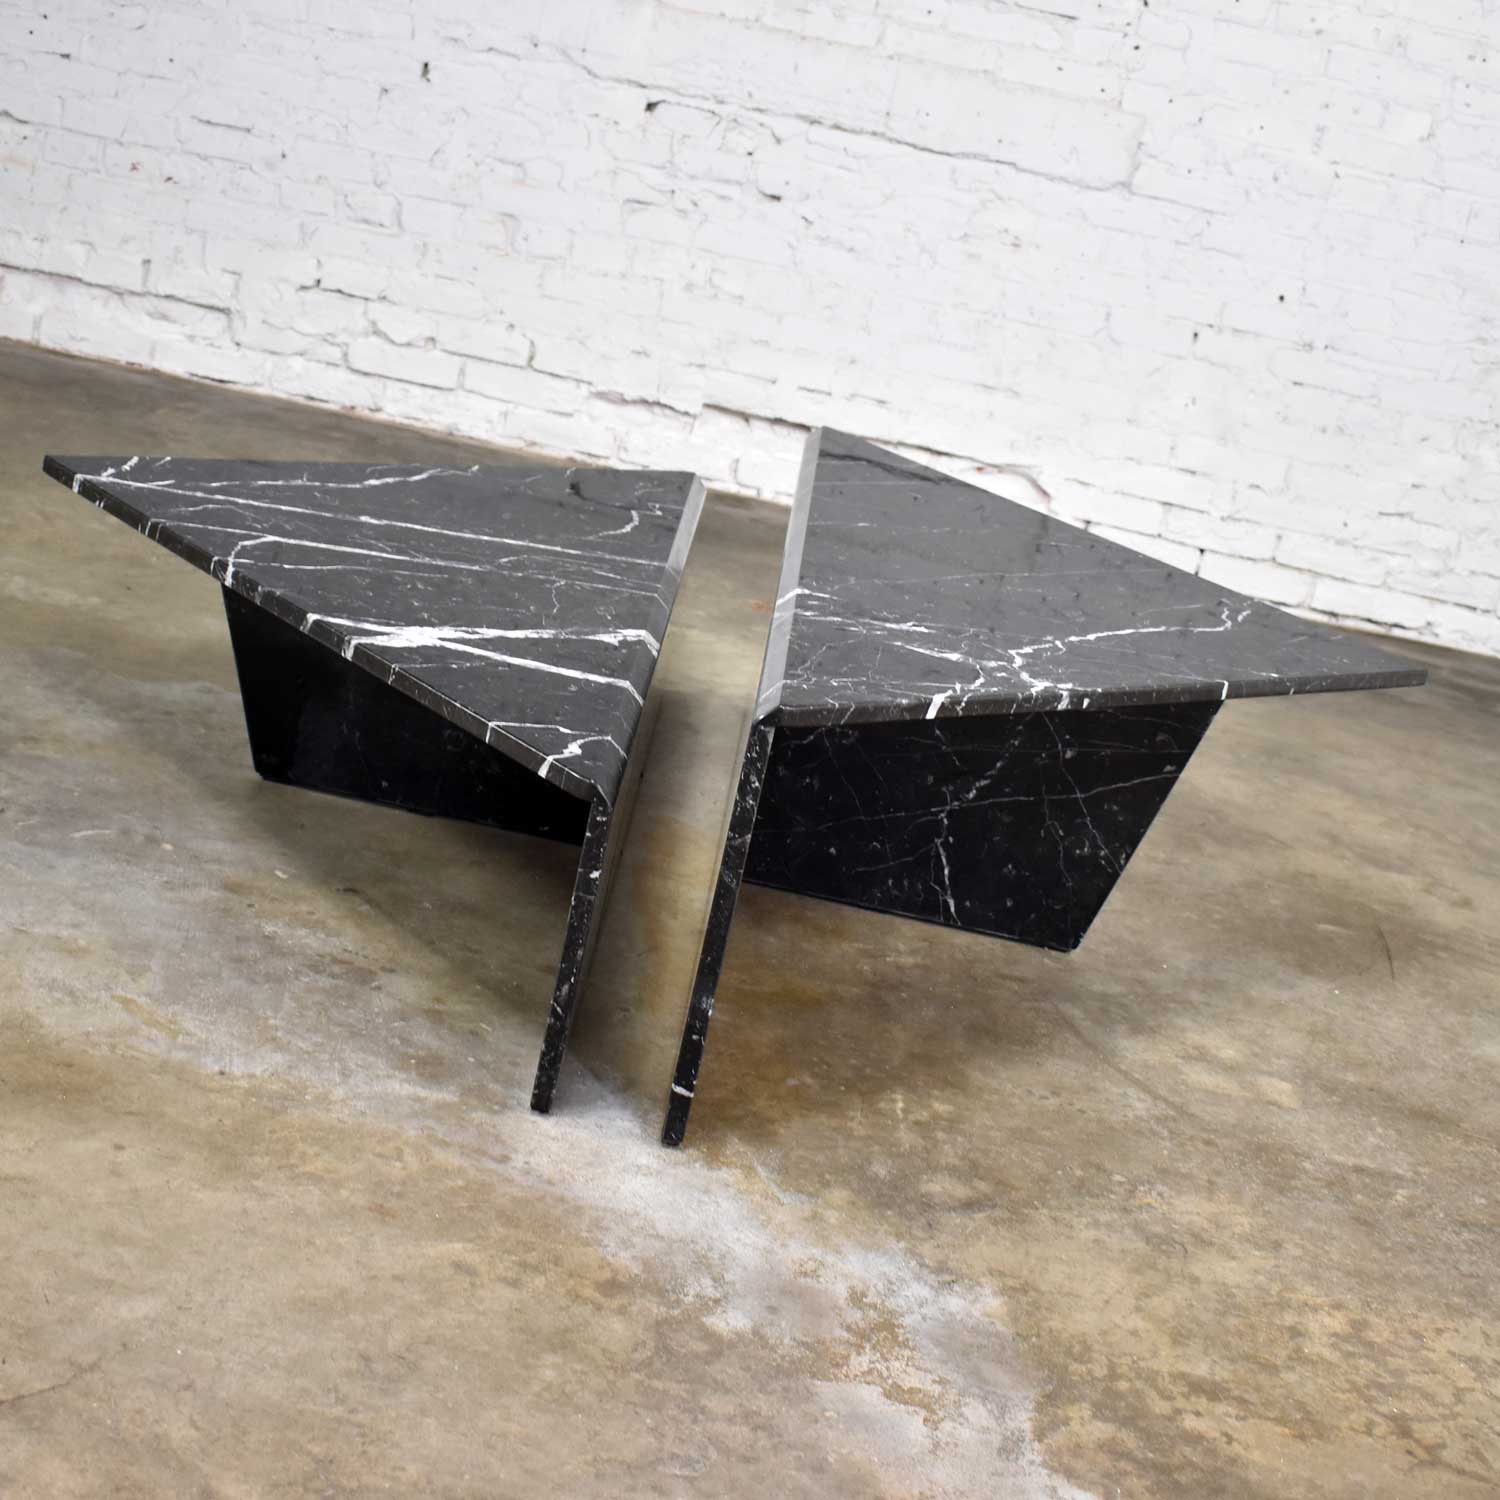 Black Marble Triangle Bi-Level Pair Tables as Coffee Table or End Tables Style Up & Up